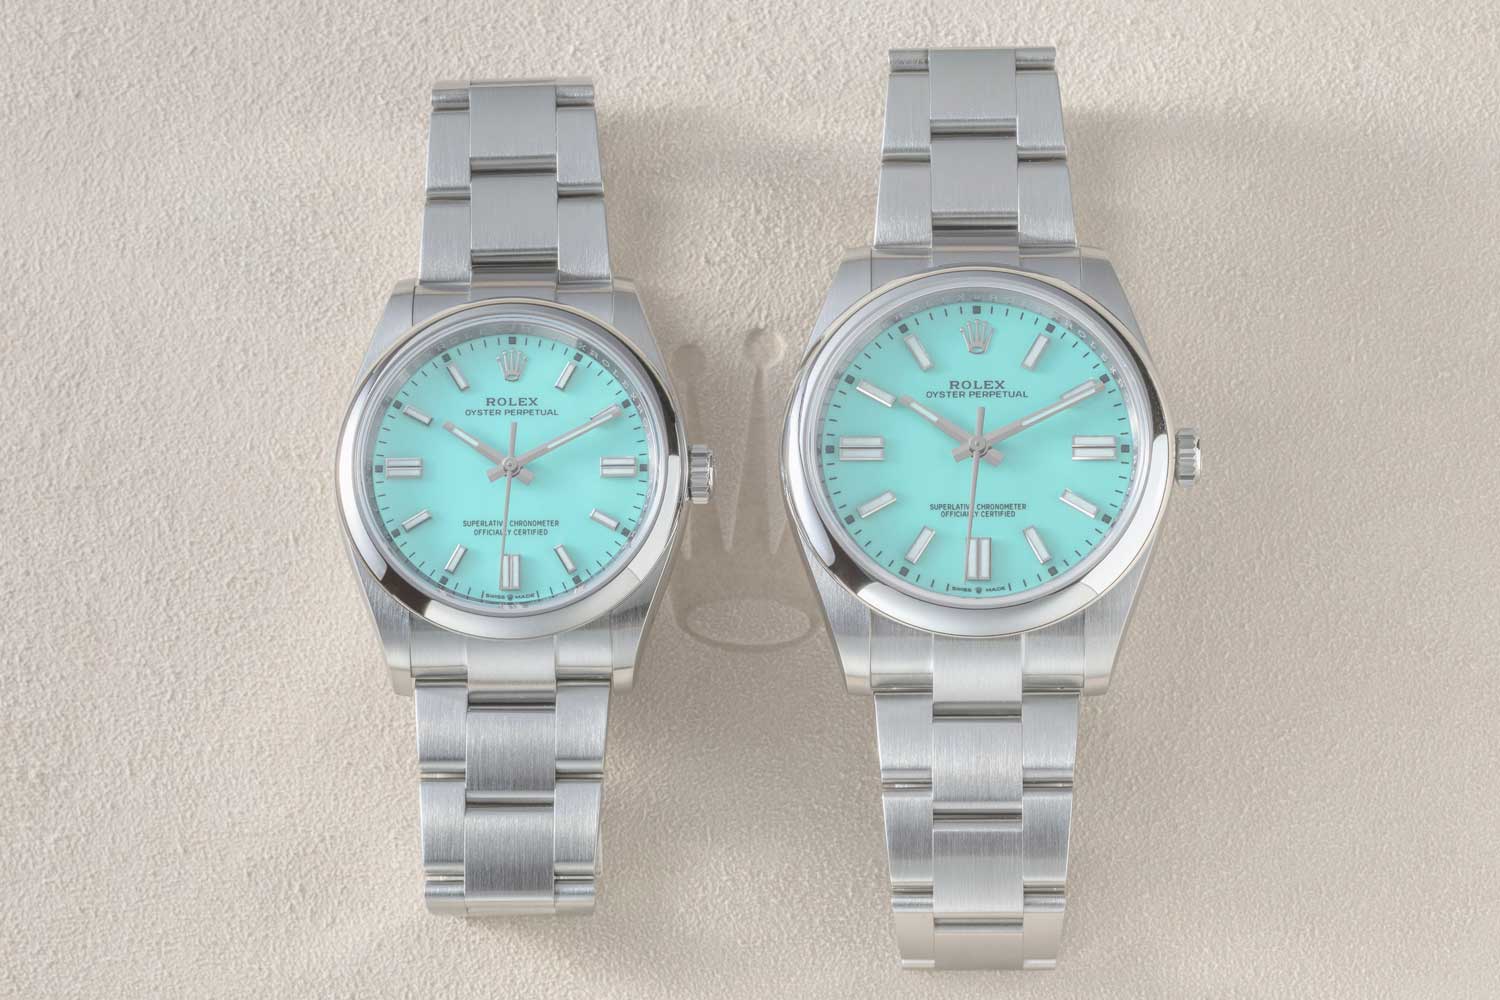 The 36mm and 41mm sizes of the 2020 Rolex Oyster Perpetual side-by-side, seen here with the much spoken of turquoise dial (Image: Revolution©)